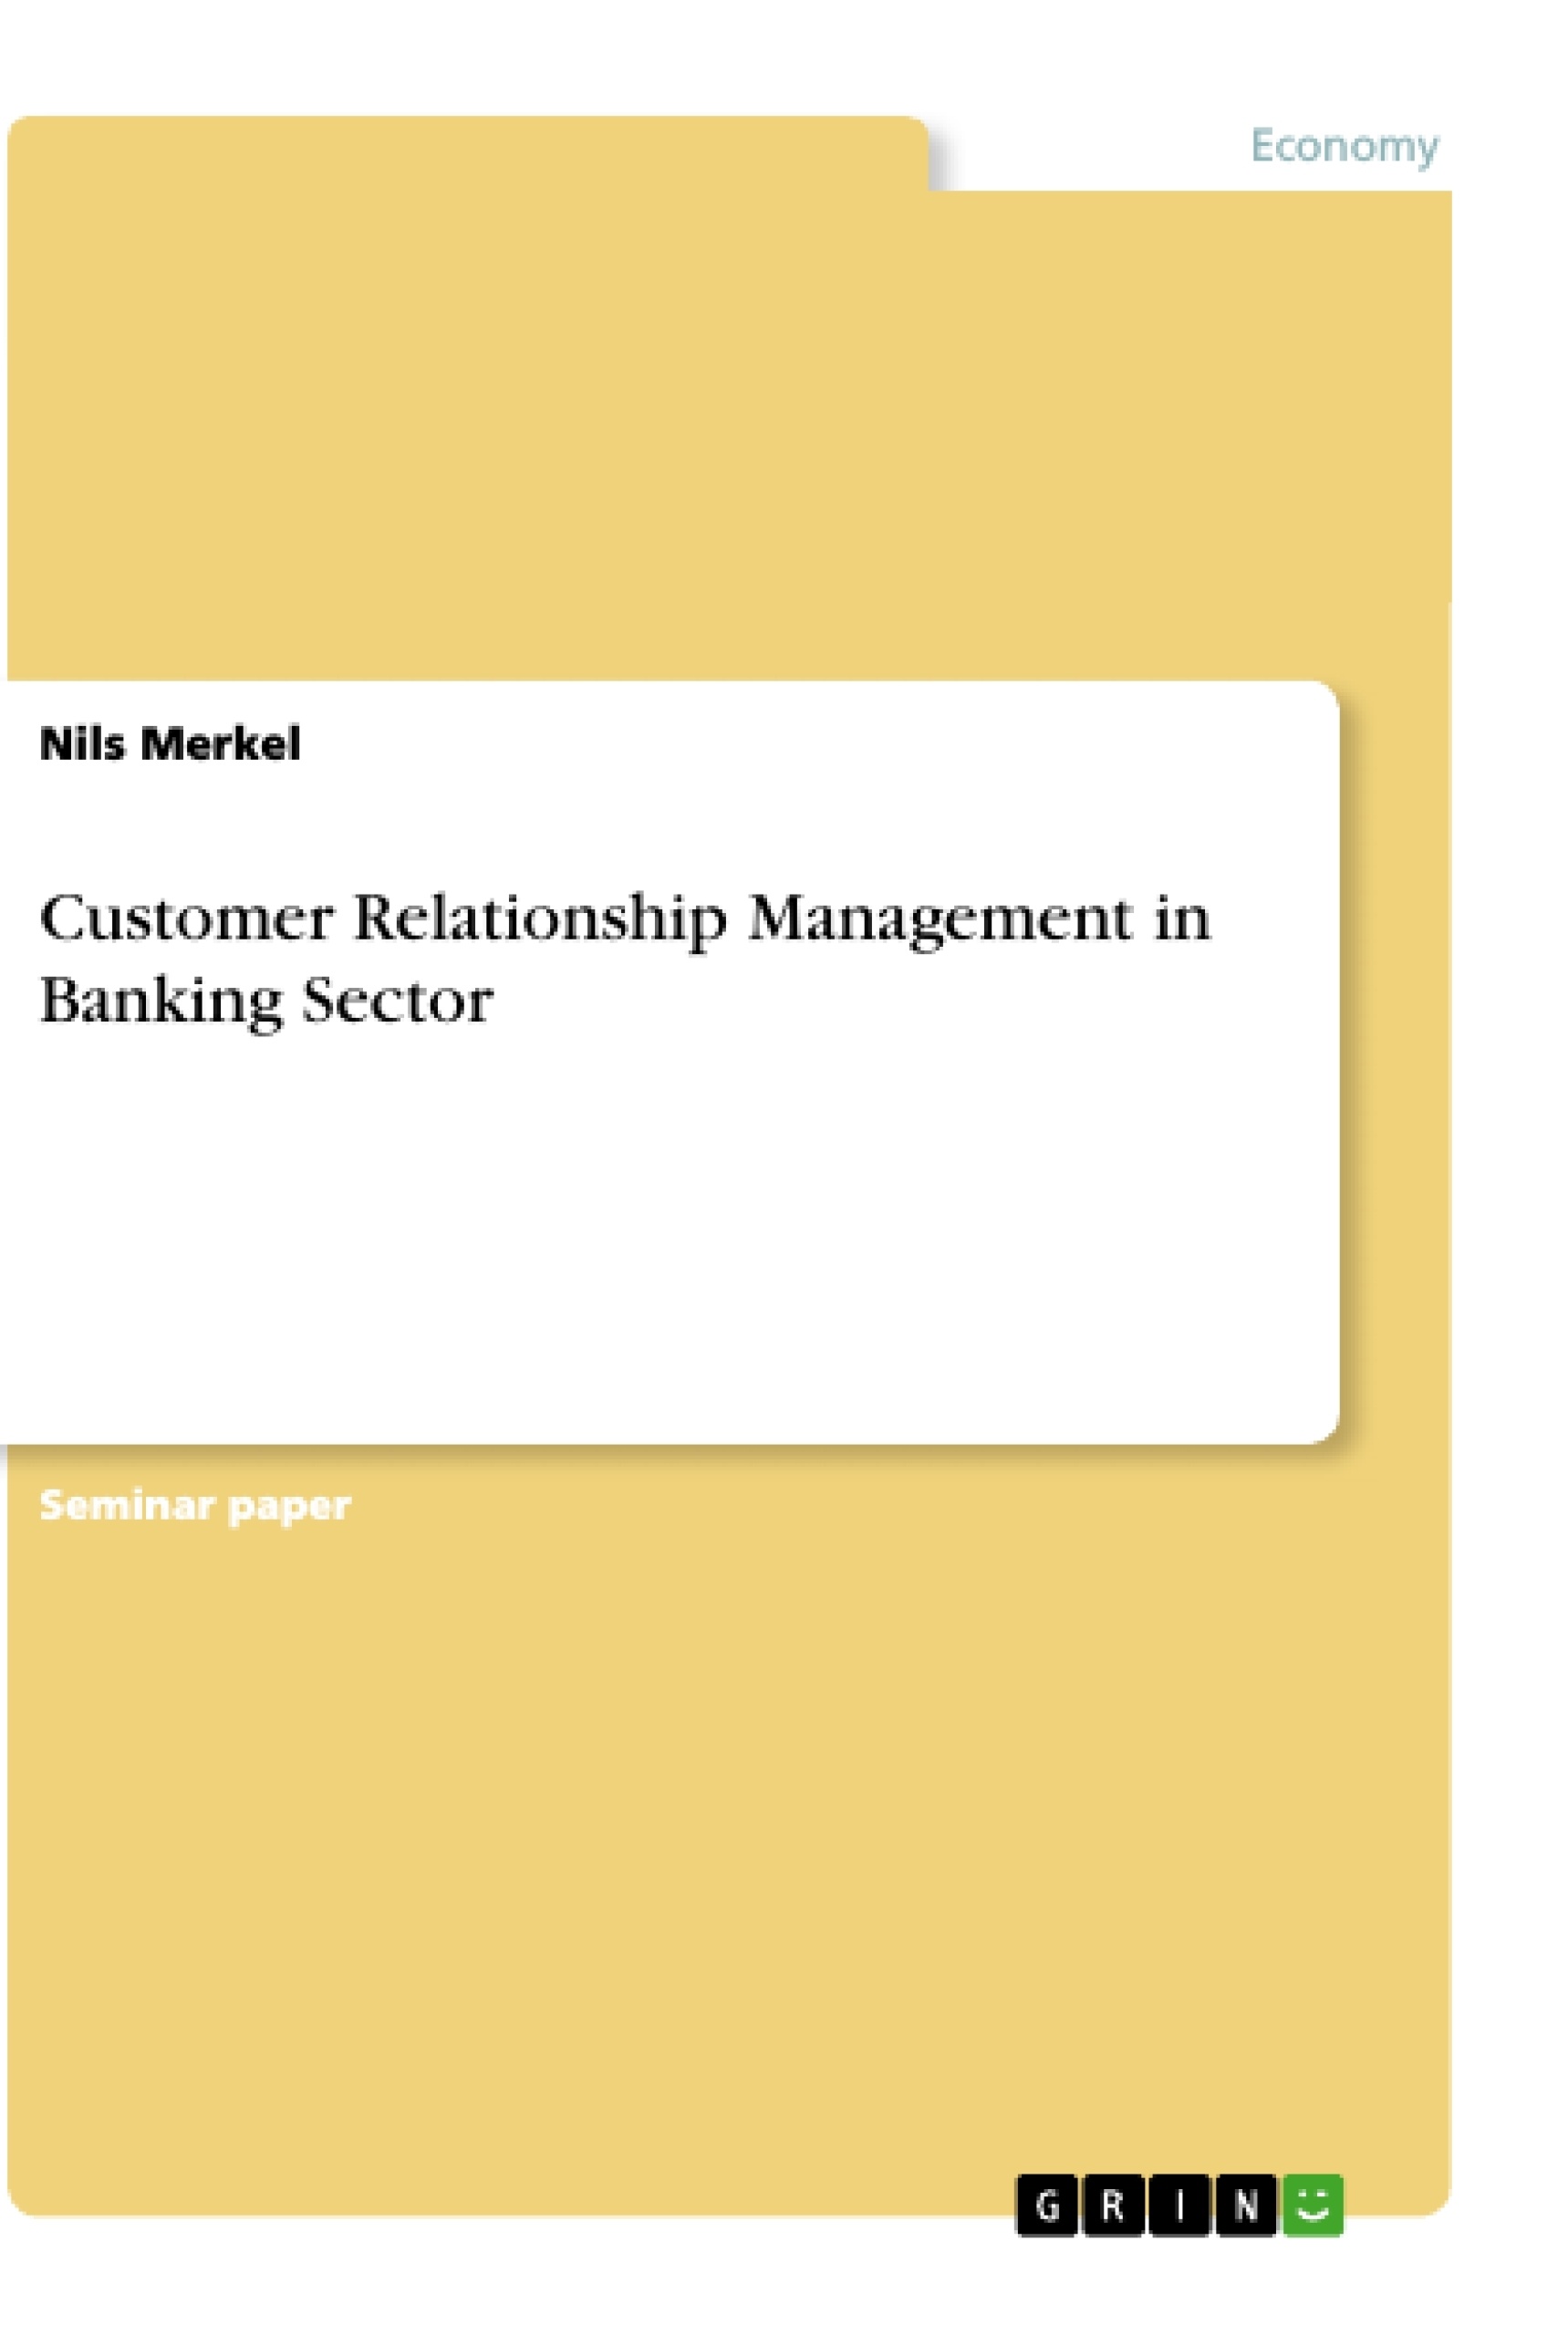 Title: Customer Relationship Management in Banking Sector